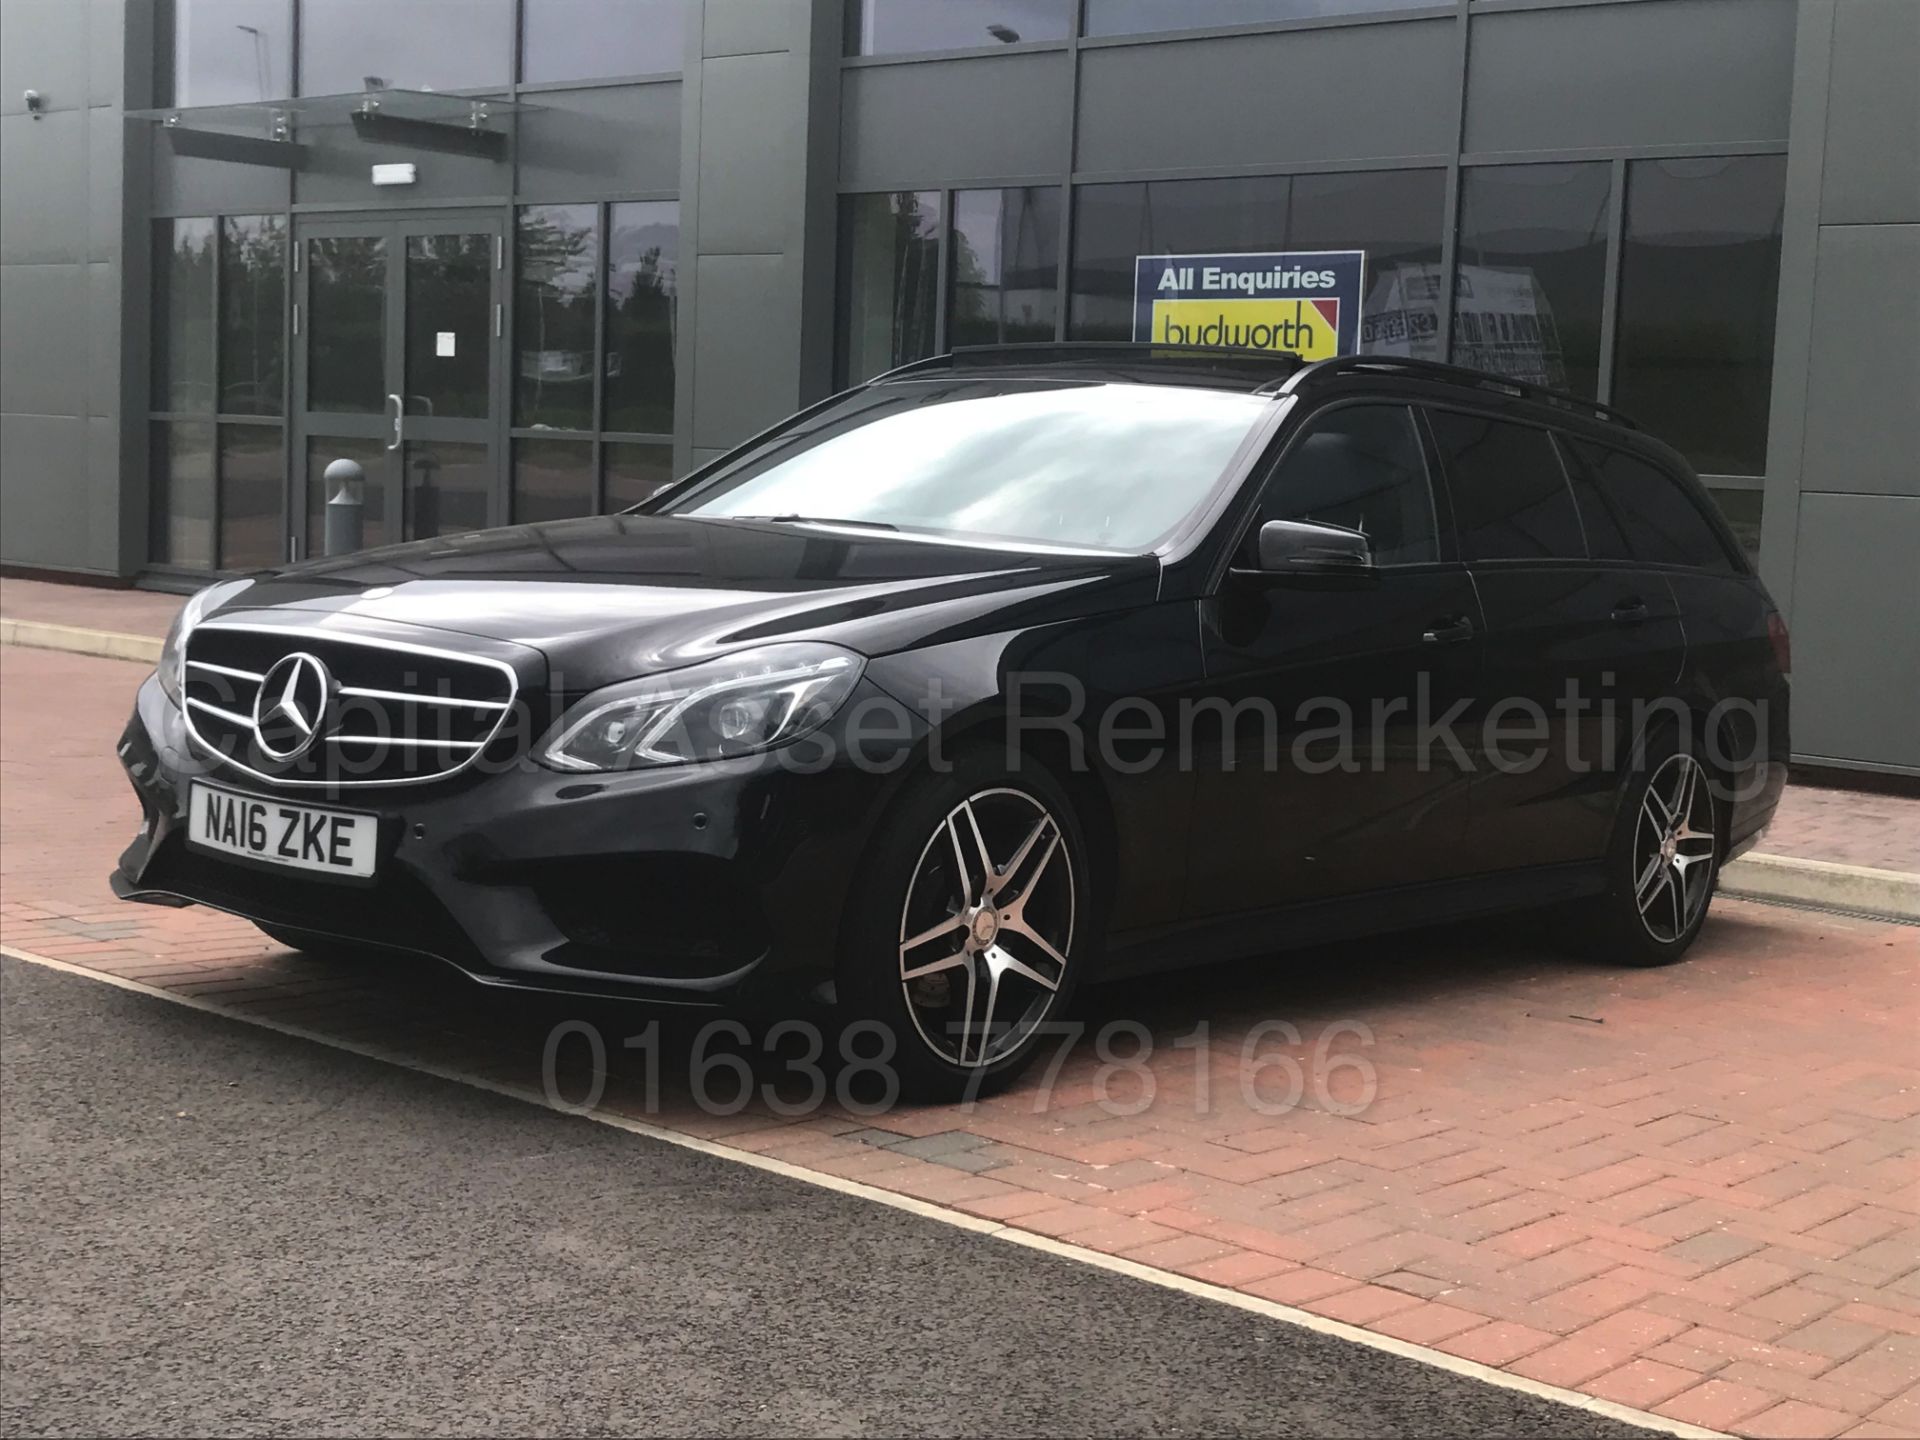 (On Sale)MERCEDES-BENZ E220D 'AMG NIGHT EDITION - PREMIUM' (2016) 'AUTO' - LEATHER - NAV - PAN ROOF* - Image 5 of 50